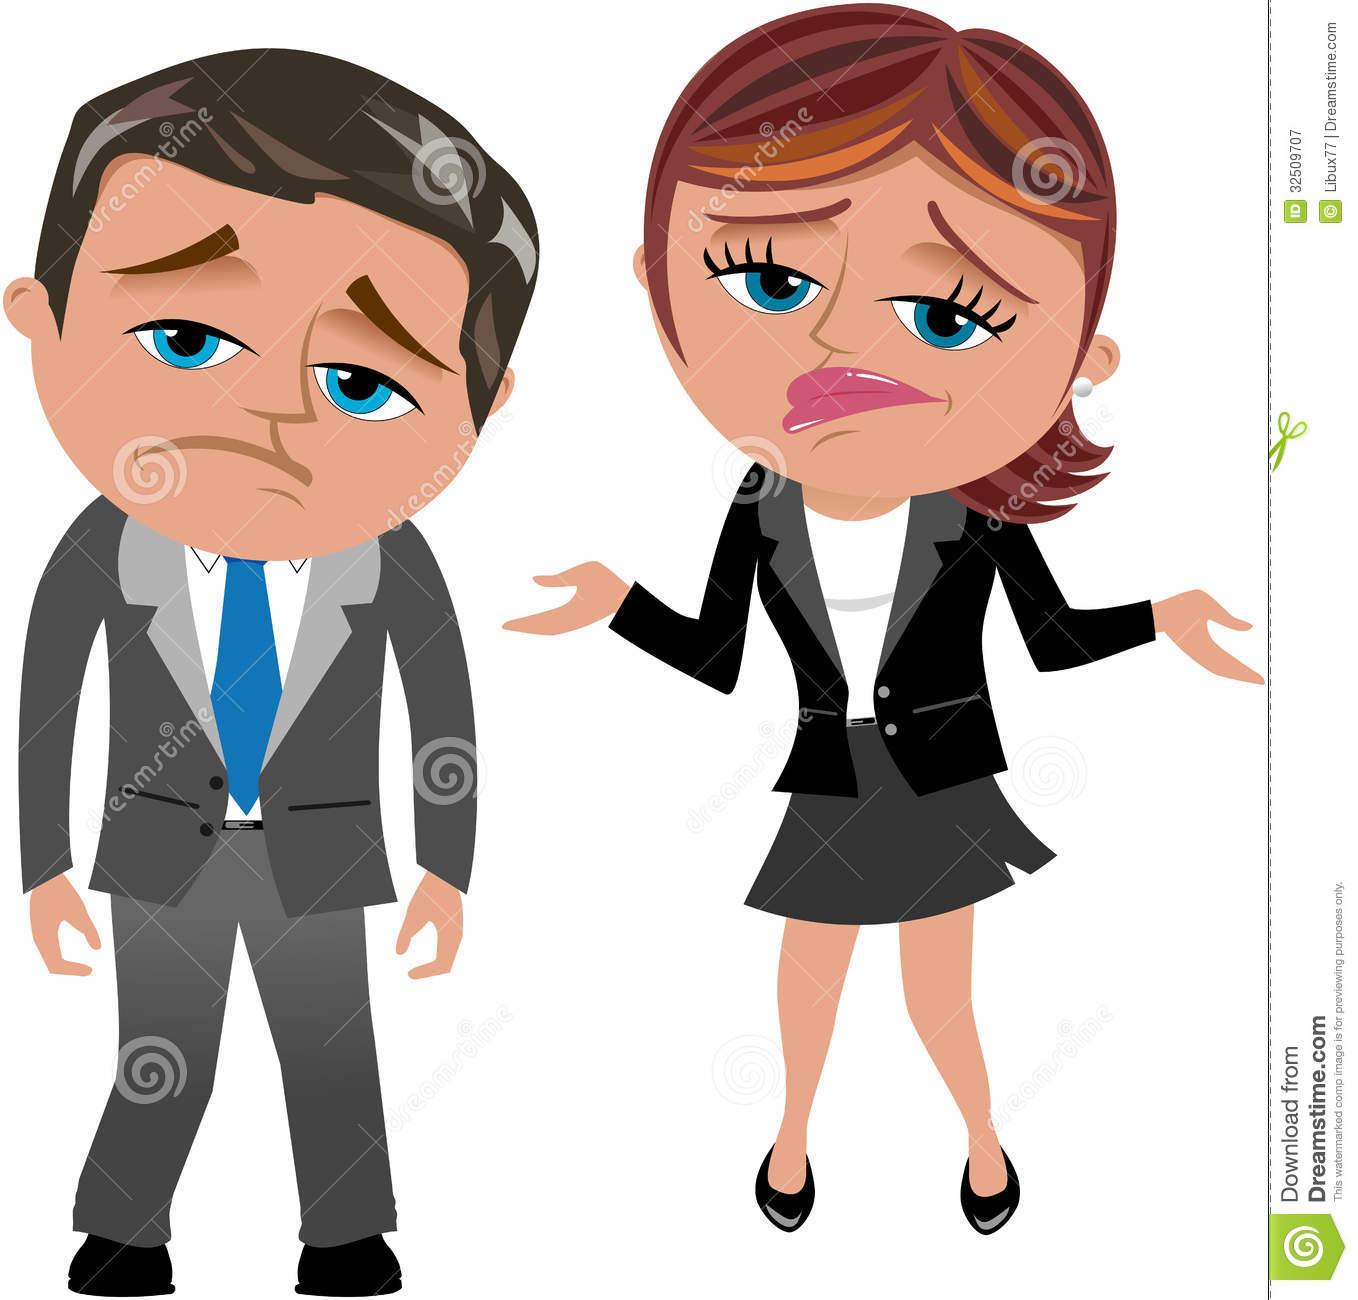 Cartoon Business Woman Meg And Business Man Bob Are Disappointed For